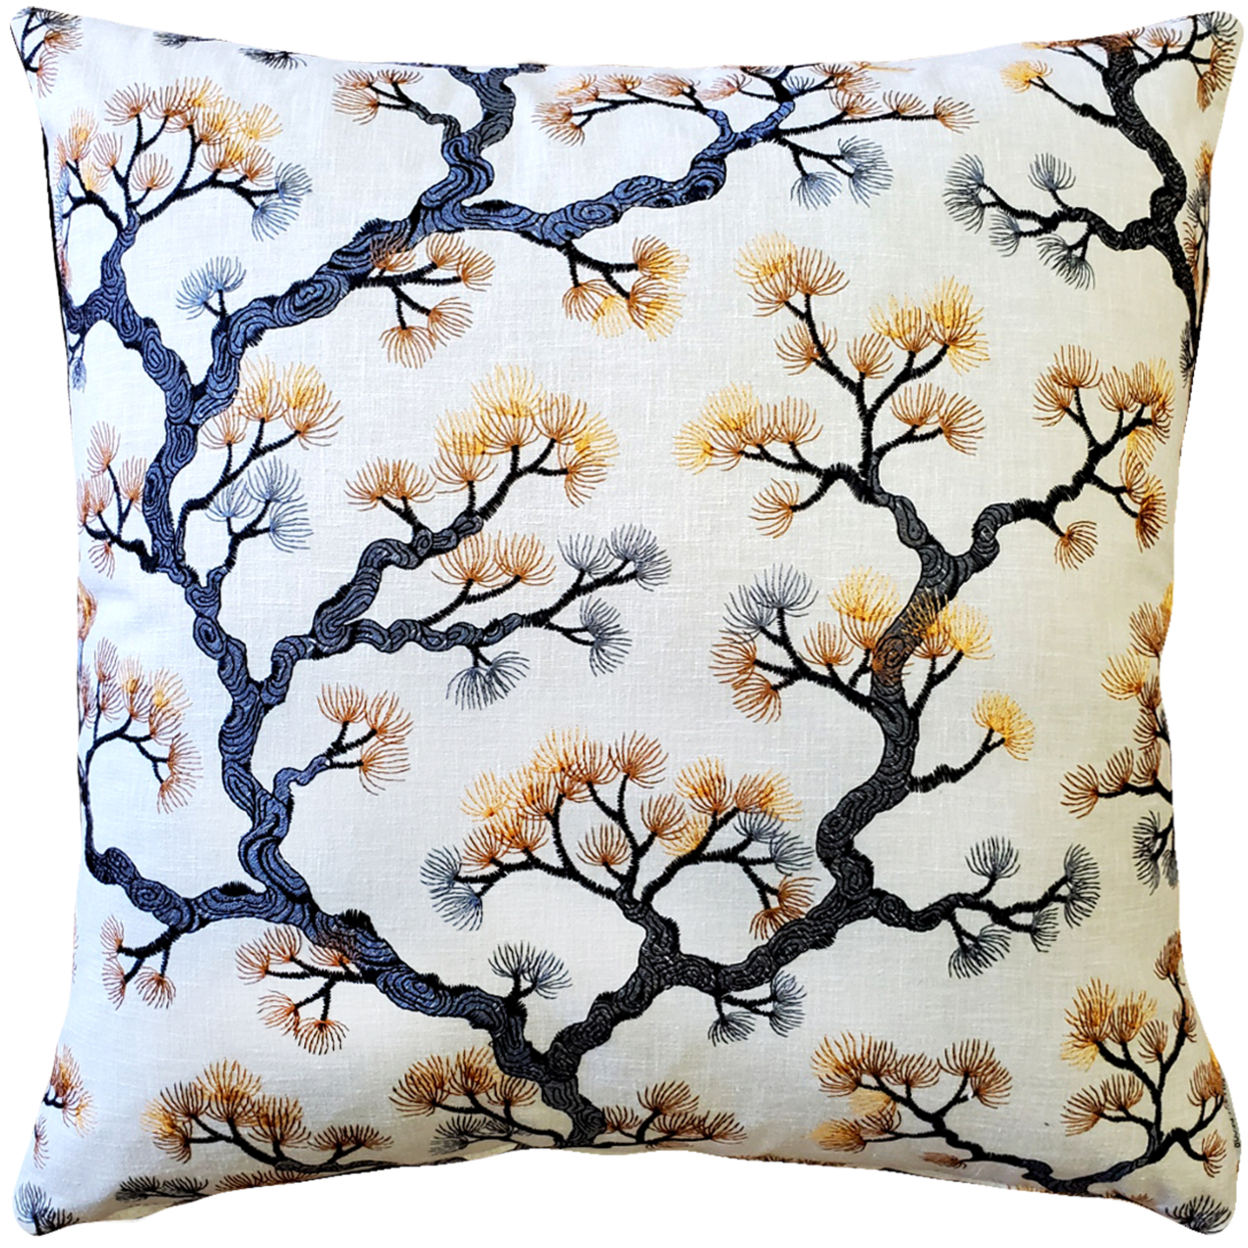 Bonsai Pine Onyx Amber Throw Pillow 19x19 Inches Square, Complete Pillow with Polyfill Pillow Insert